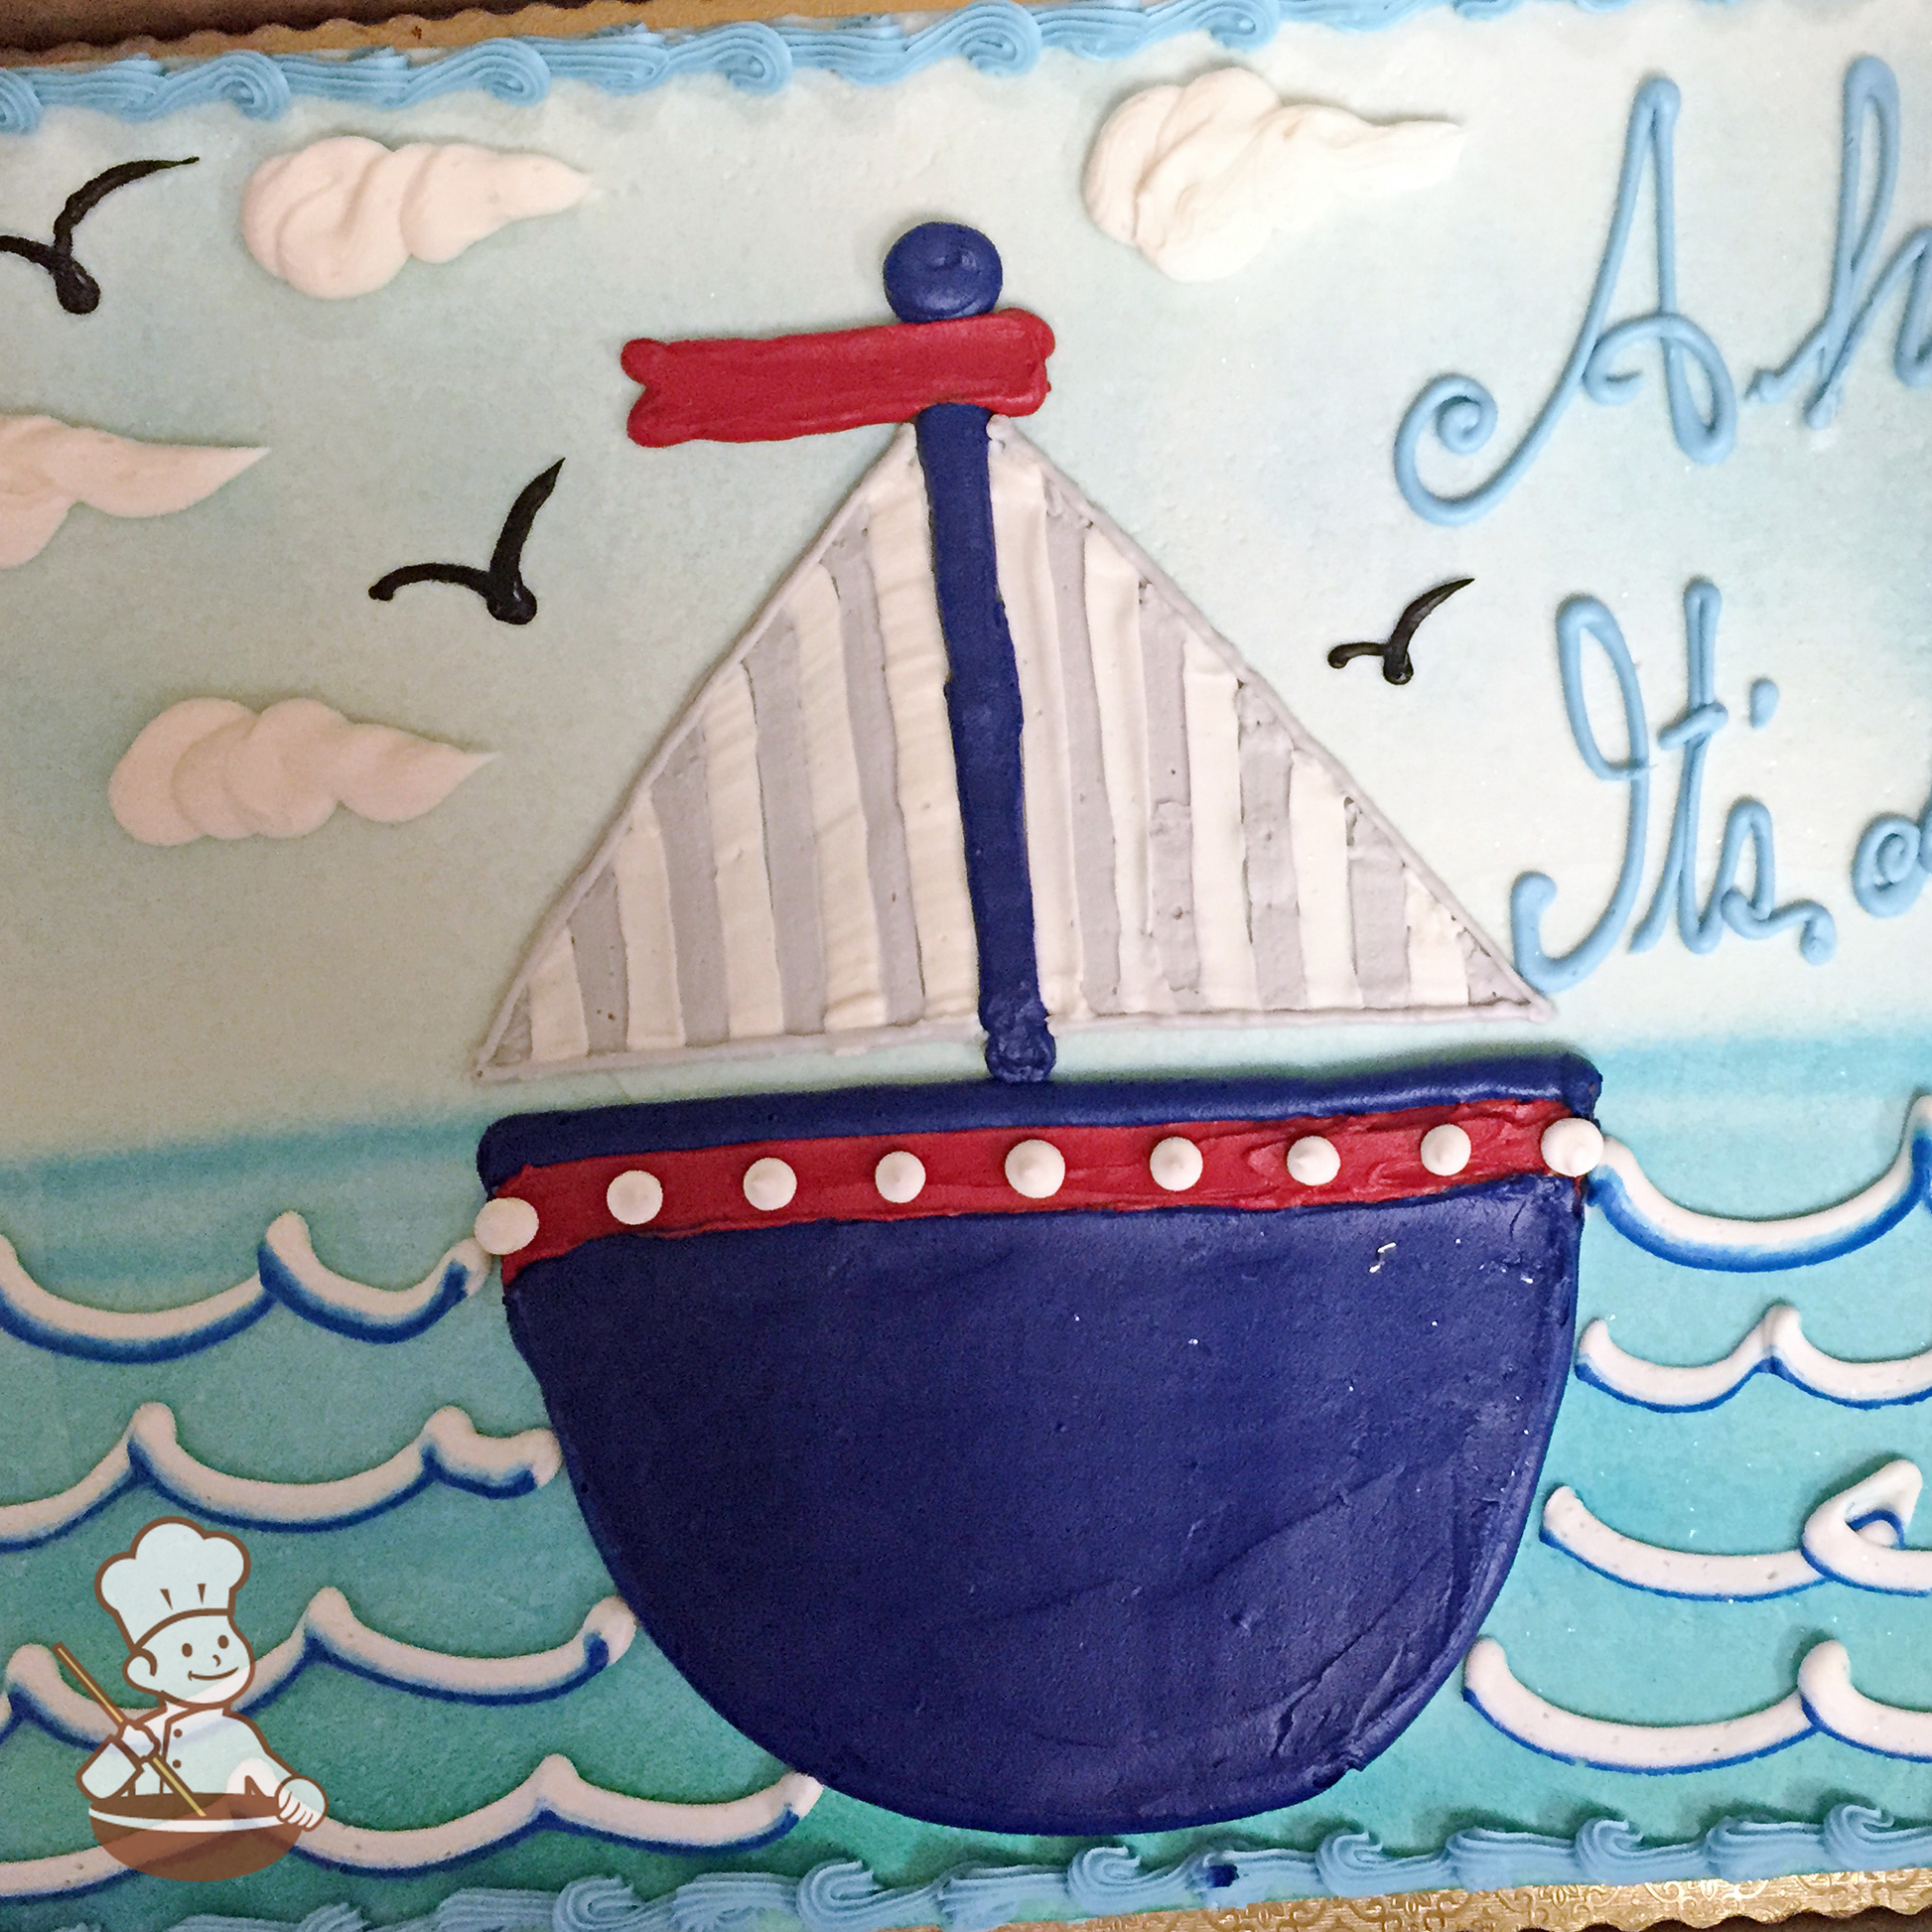 Baby shower sheet cake with buttercream sailboat out on sea with waves and sea gulls flying above.